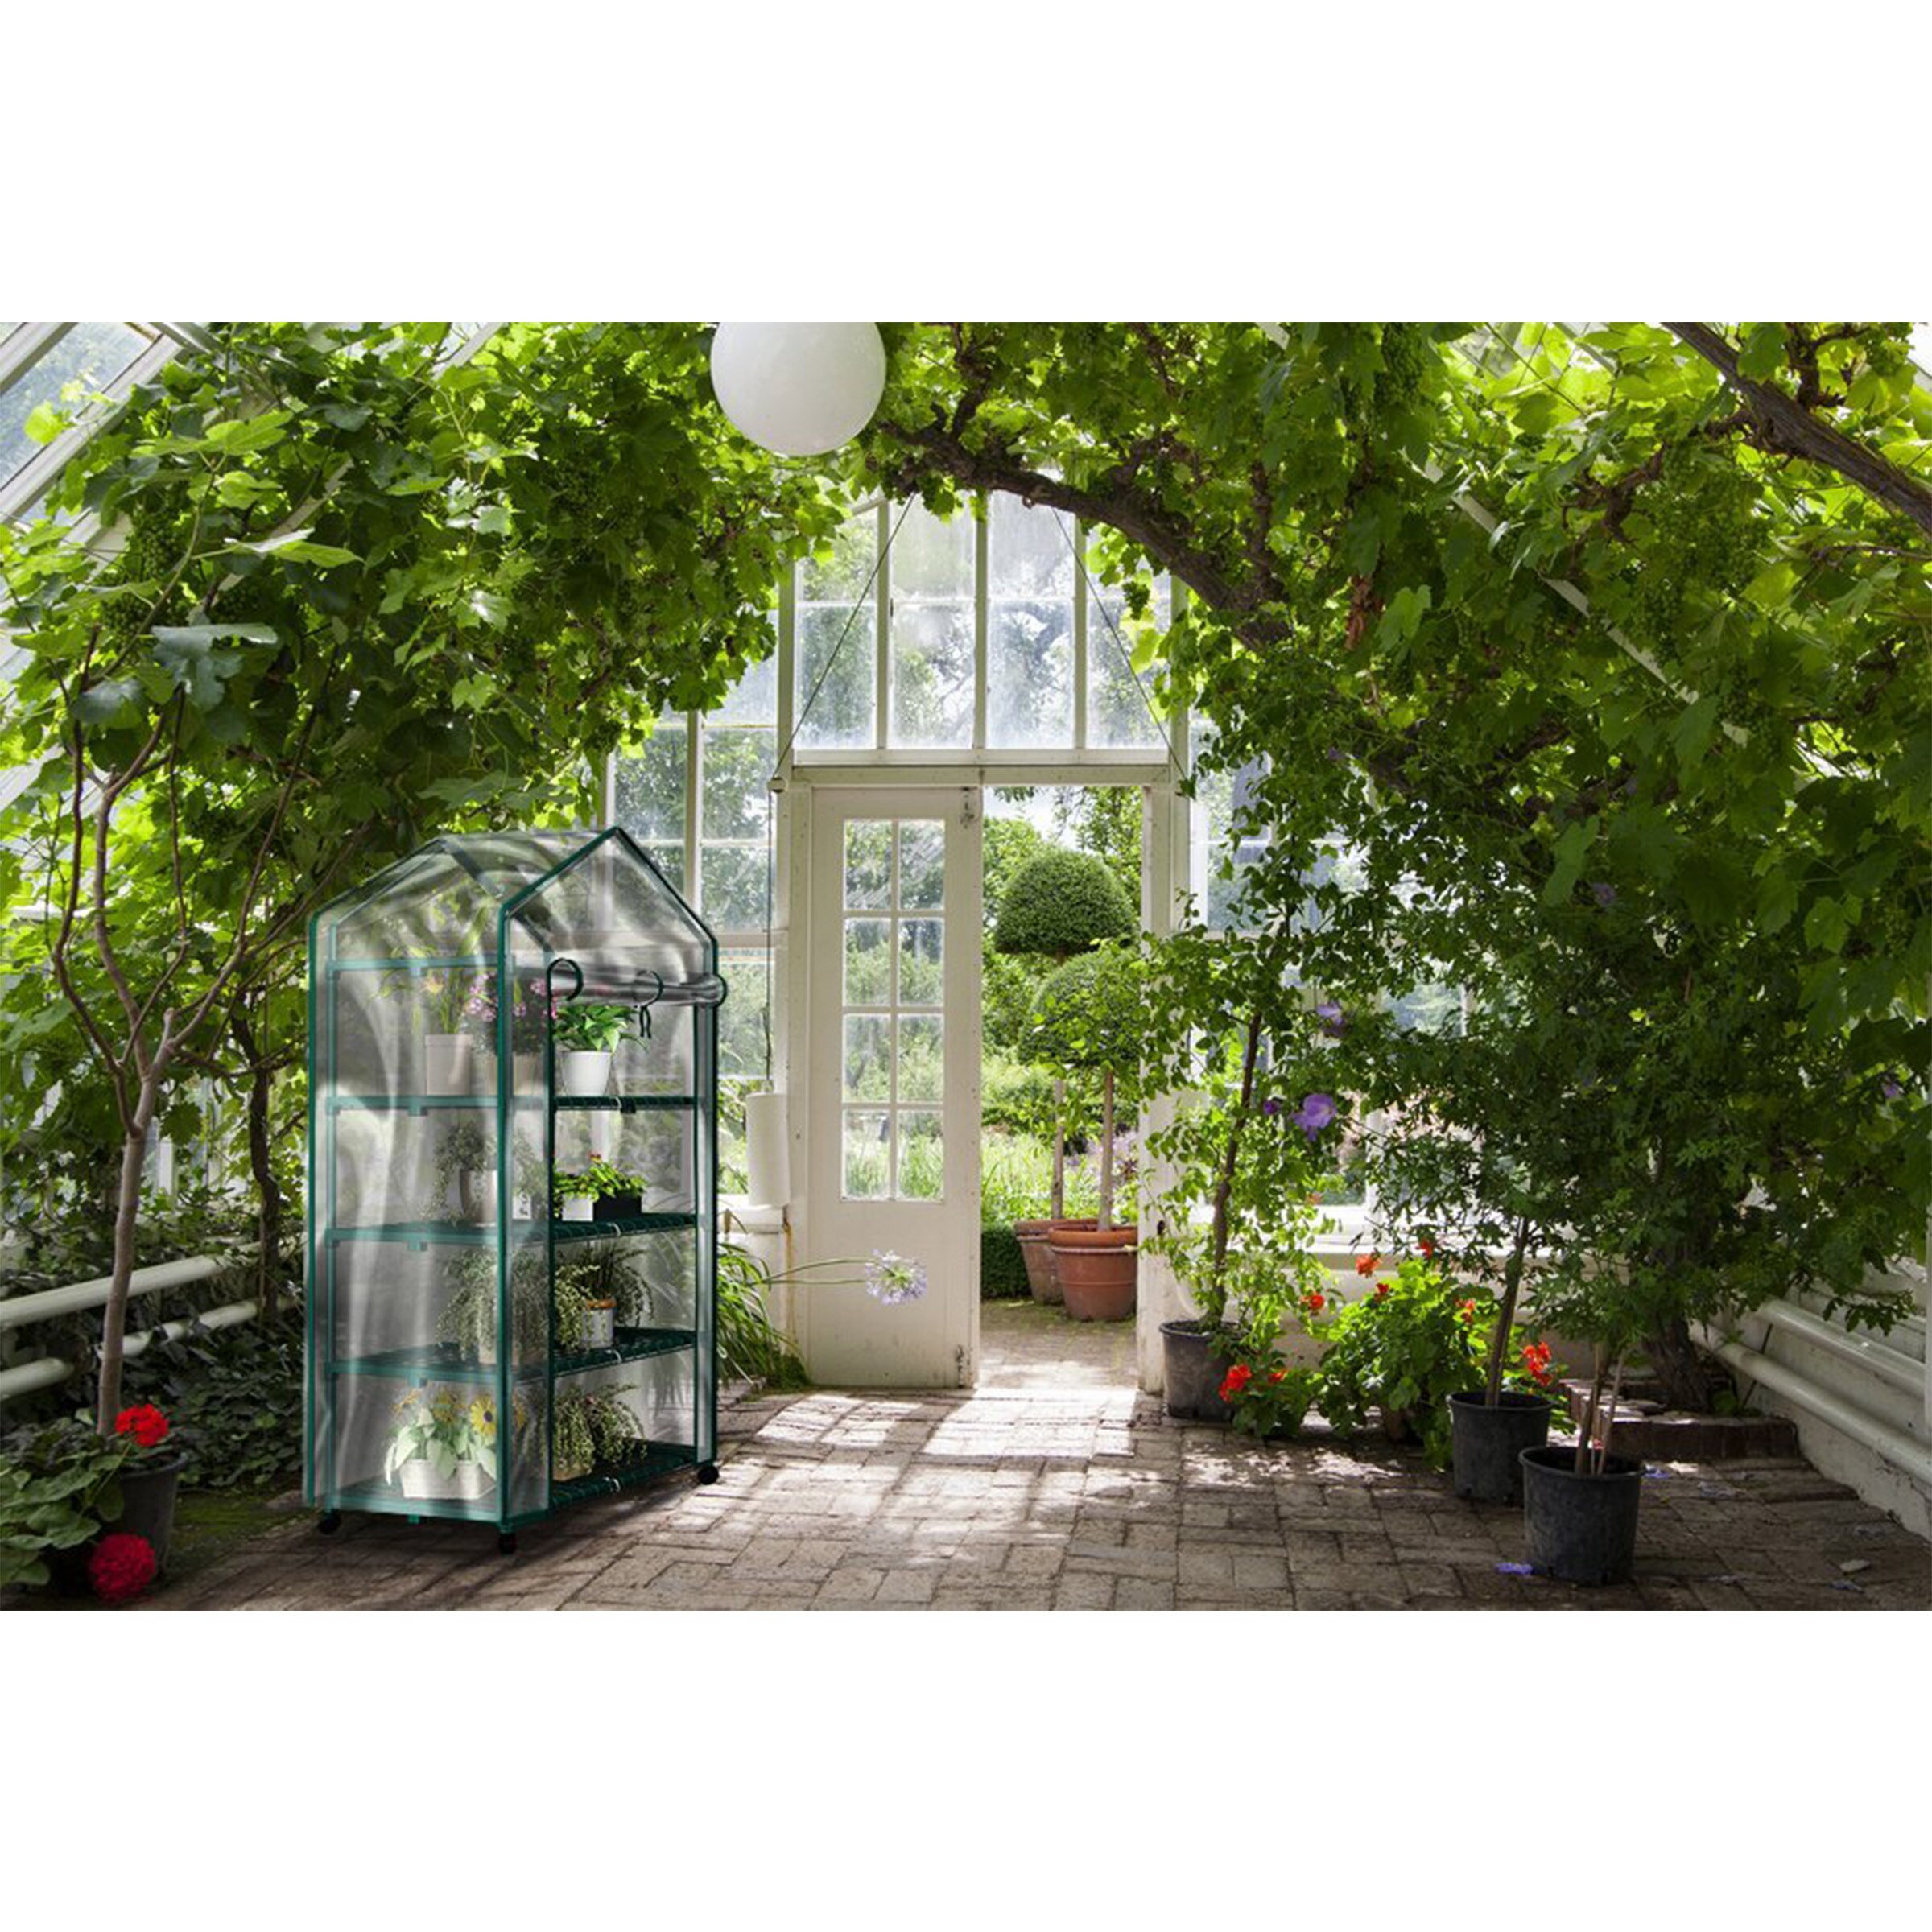 or Flowers In Any Season-Gardening Rack Seedlings Home-Complete Walk-In Greenhouse- Indoor Outdoor with 8 Sturdy Shelves-Grow Plants Herbs 